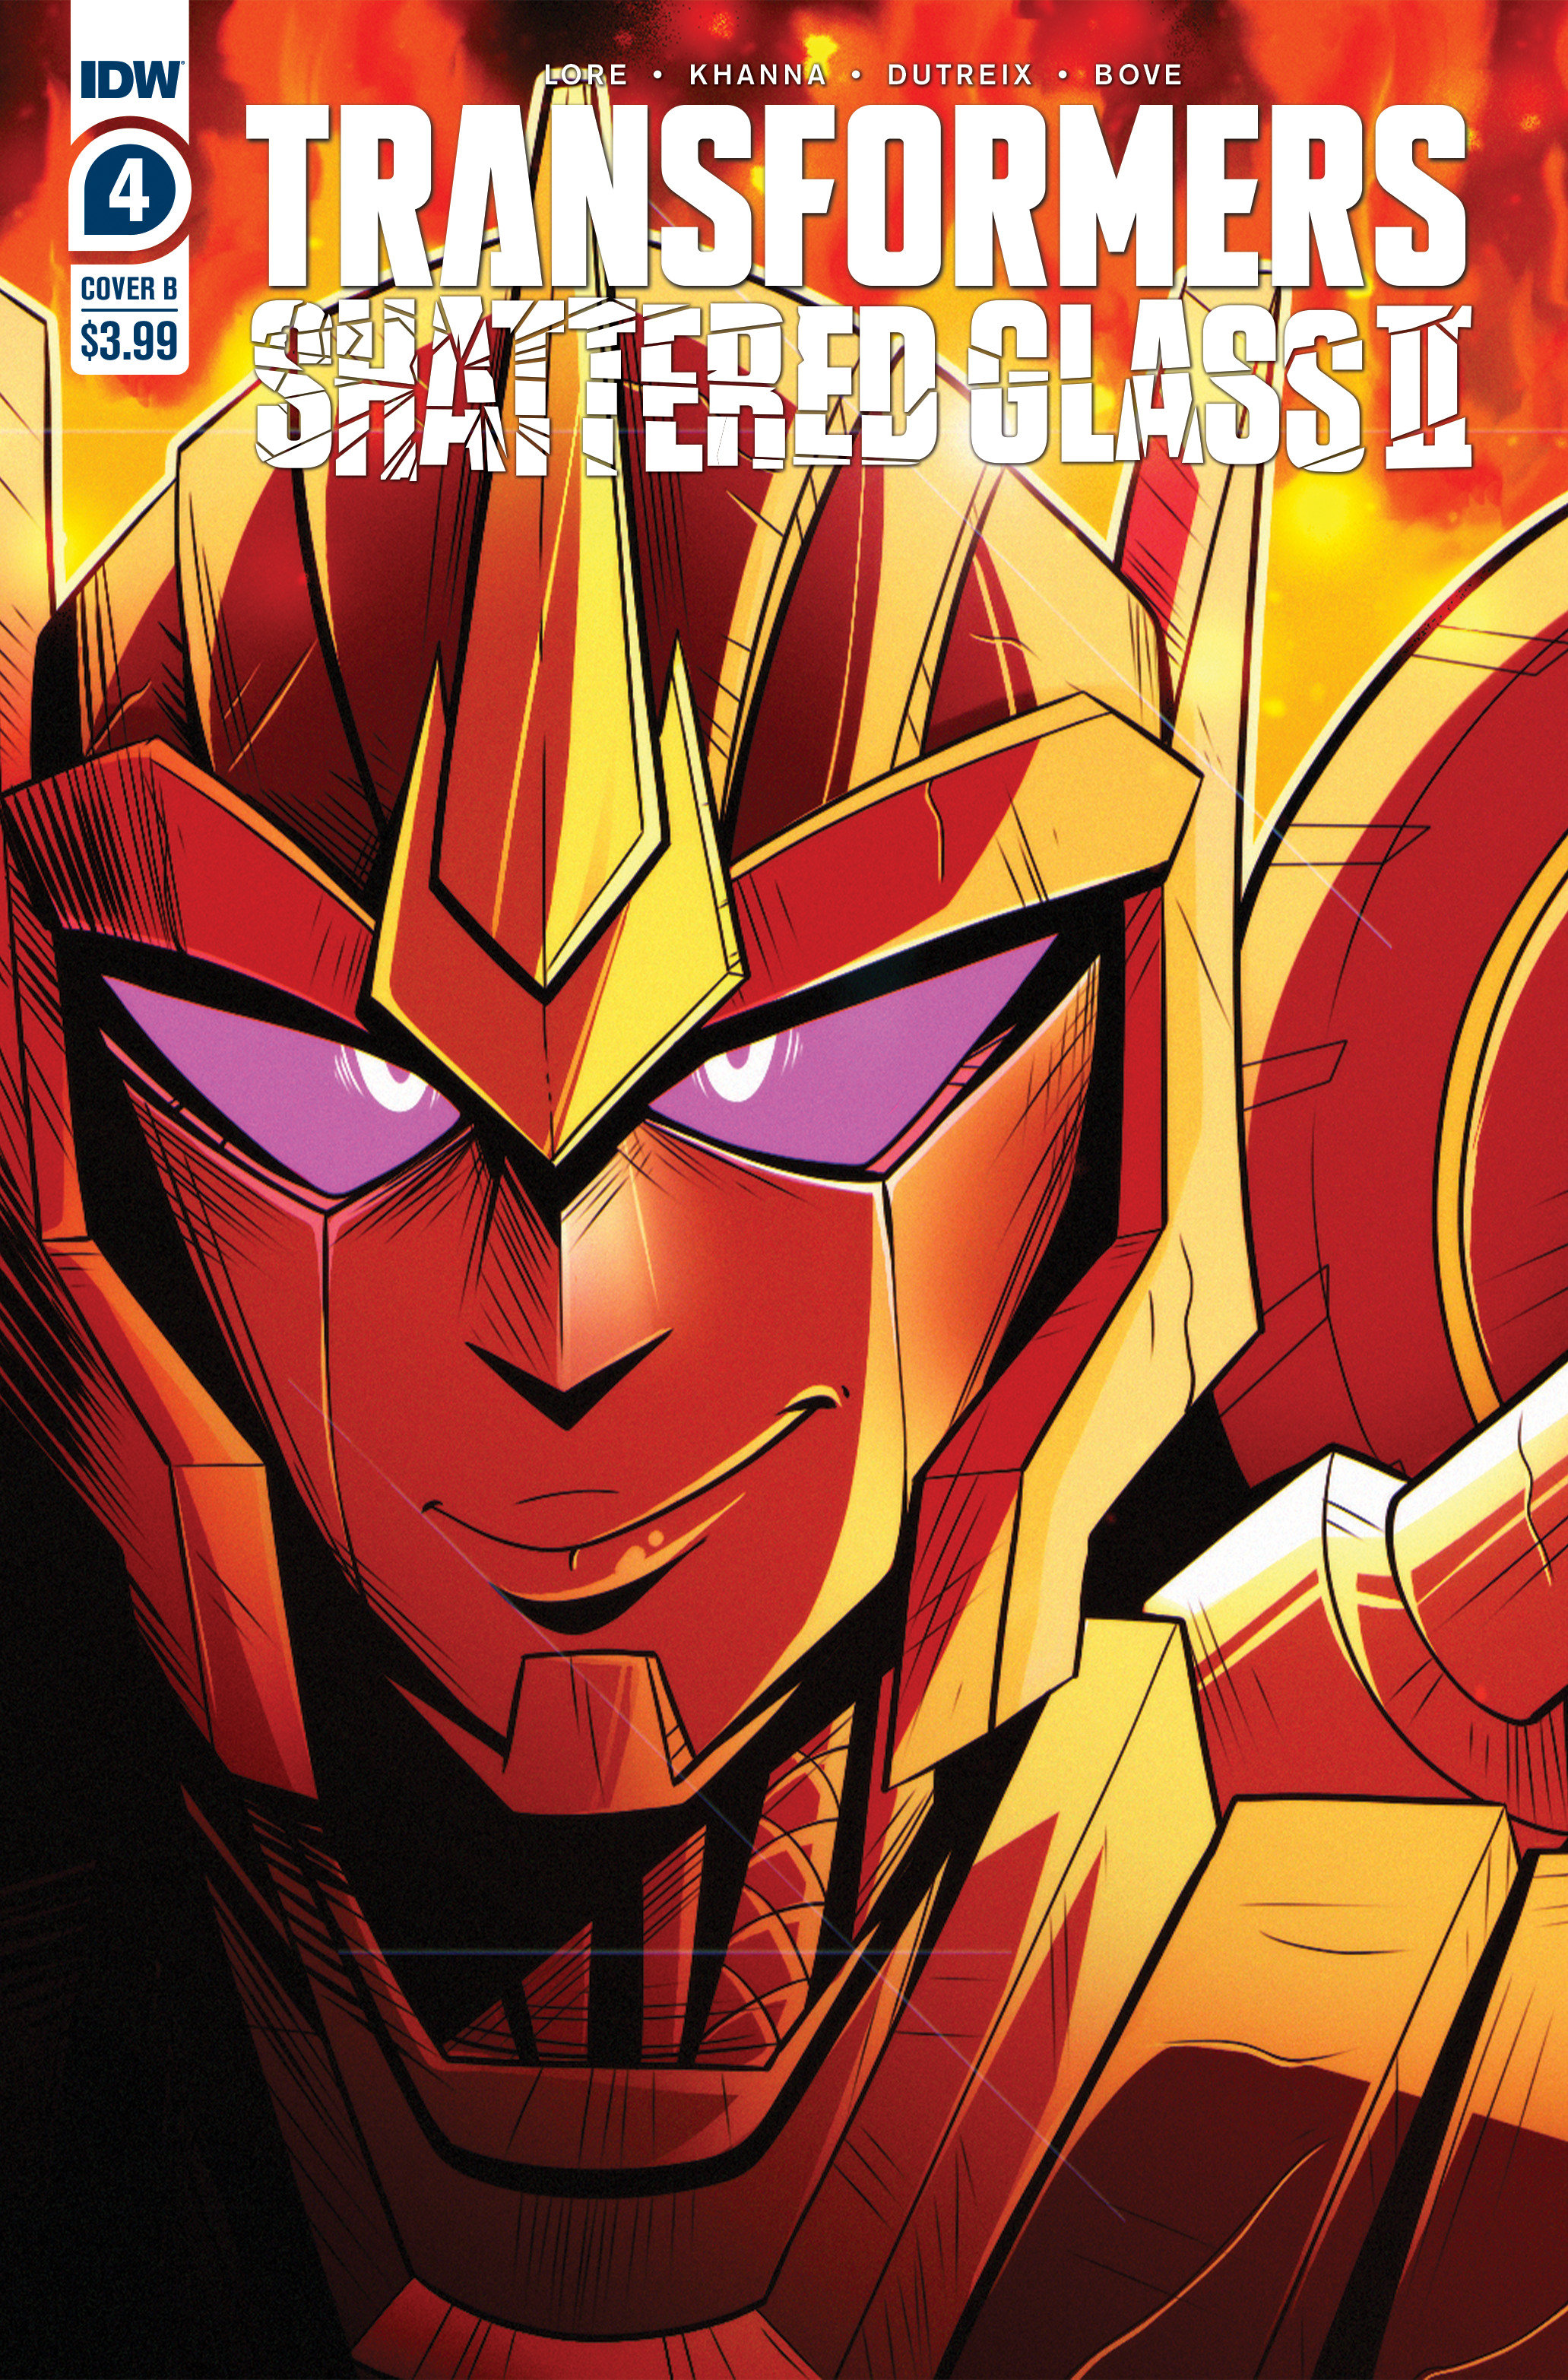 Transformers Shattered Glass II #4 Cover B Phillips